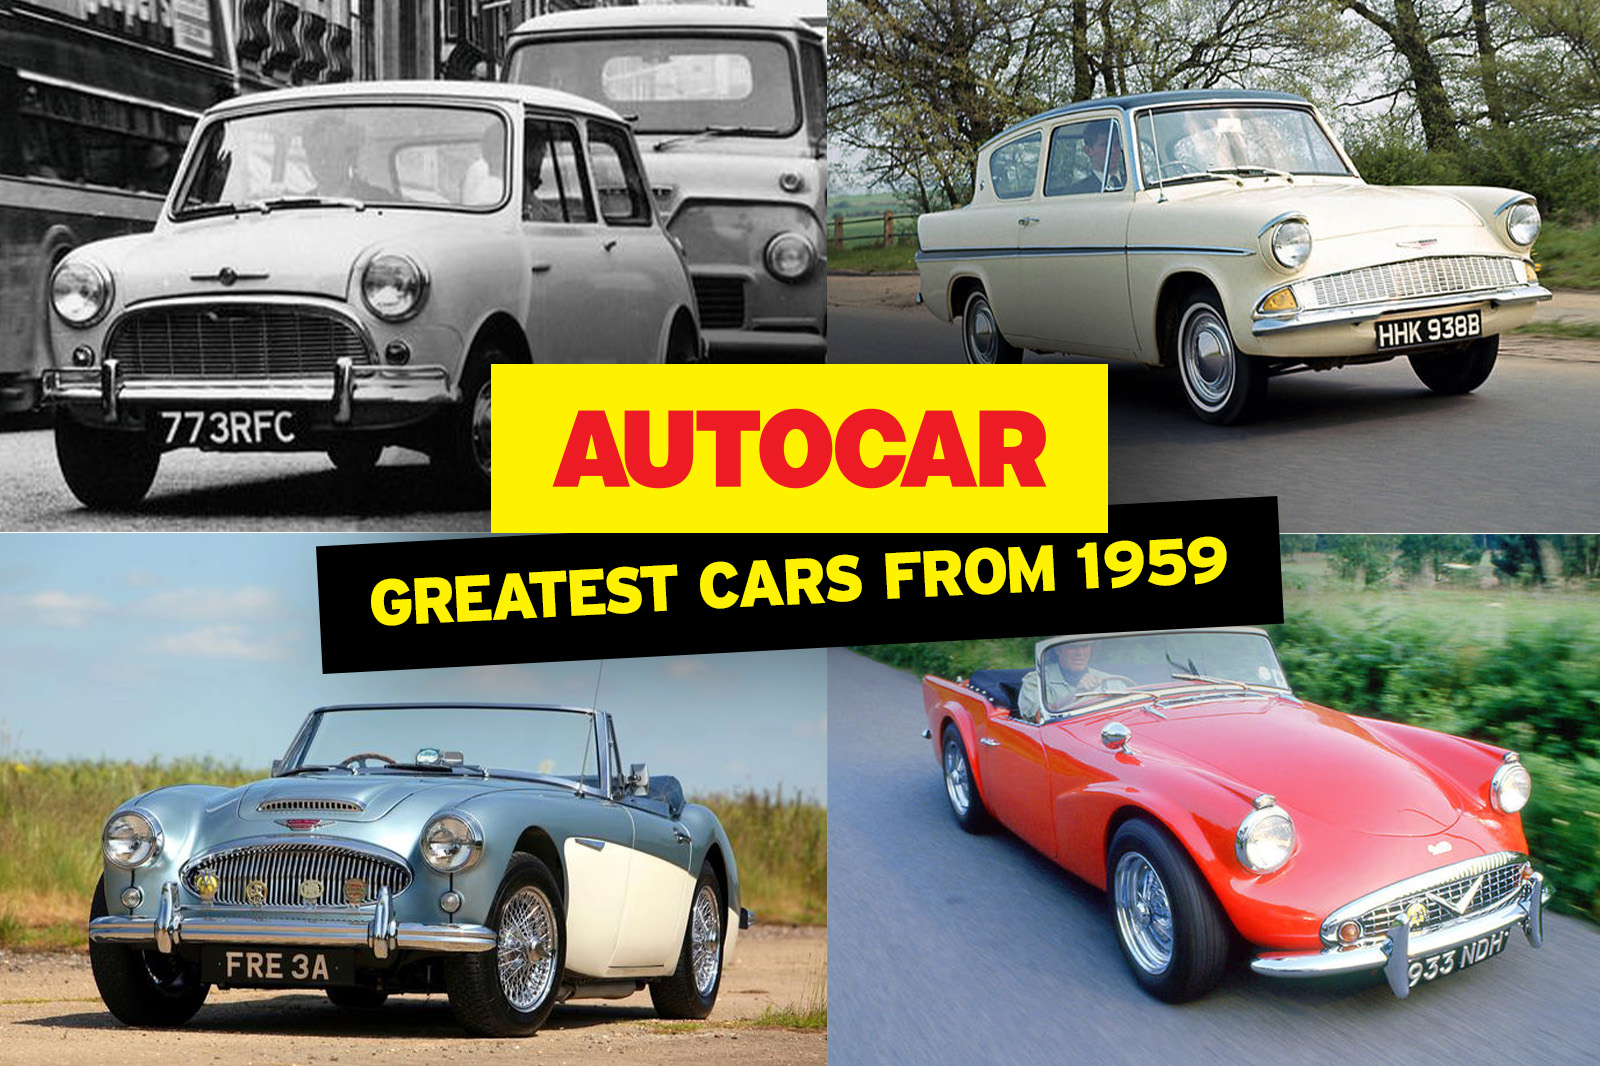 All the best cars from 1959